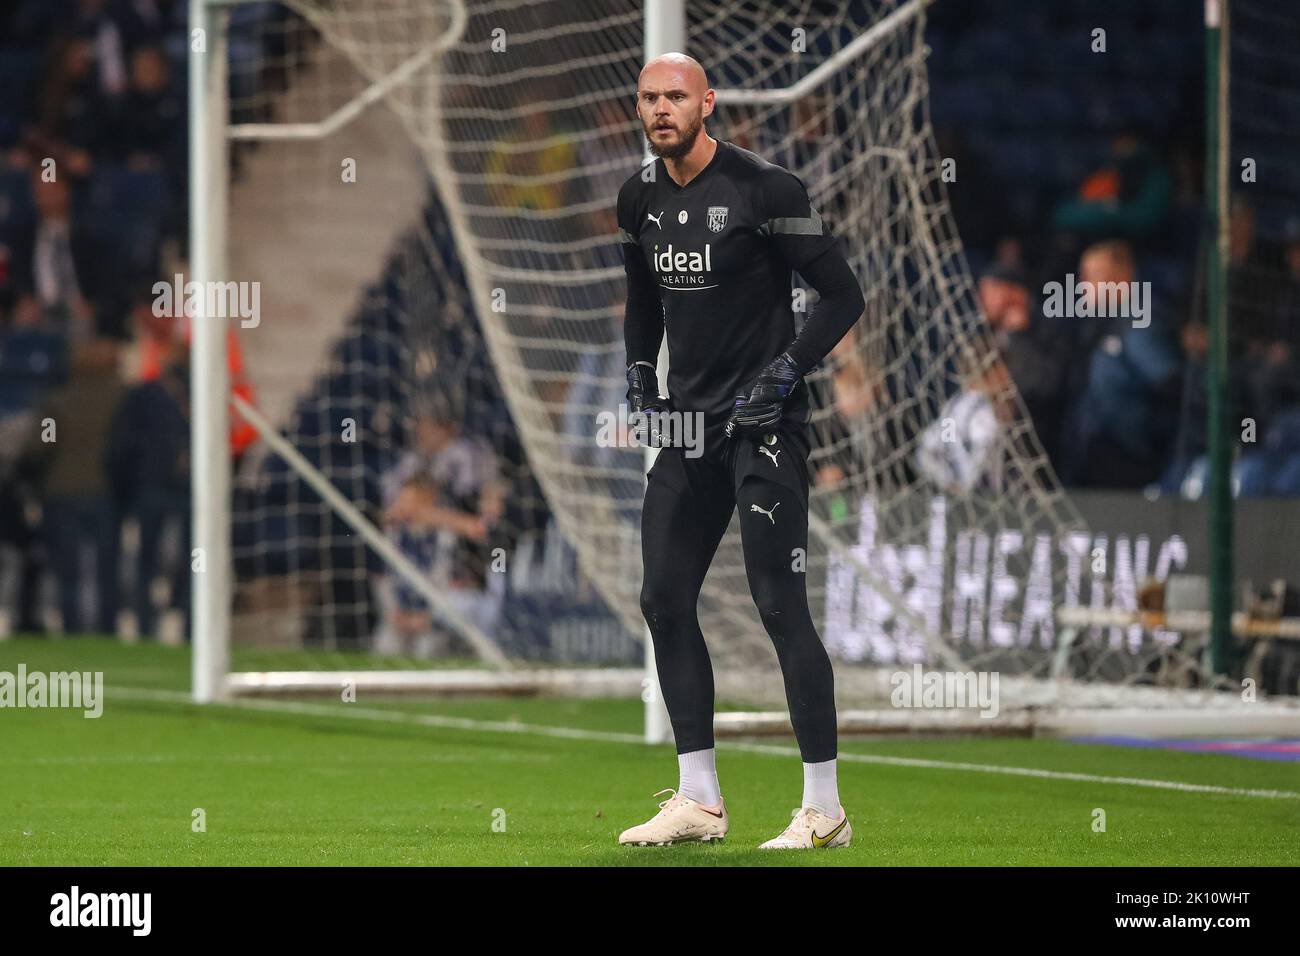 Dave Button #1 of West Bromwich Albion during the pre-game warm up ahead of the Sky Bet Championship match West Bromwich Albion vs Birmingham City at The Hawthorns, West Bromwich, United Kingdom, 14th September 2022  (Photo by Gareth Evans/News Images) Stock Photo